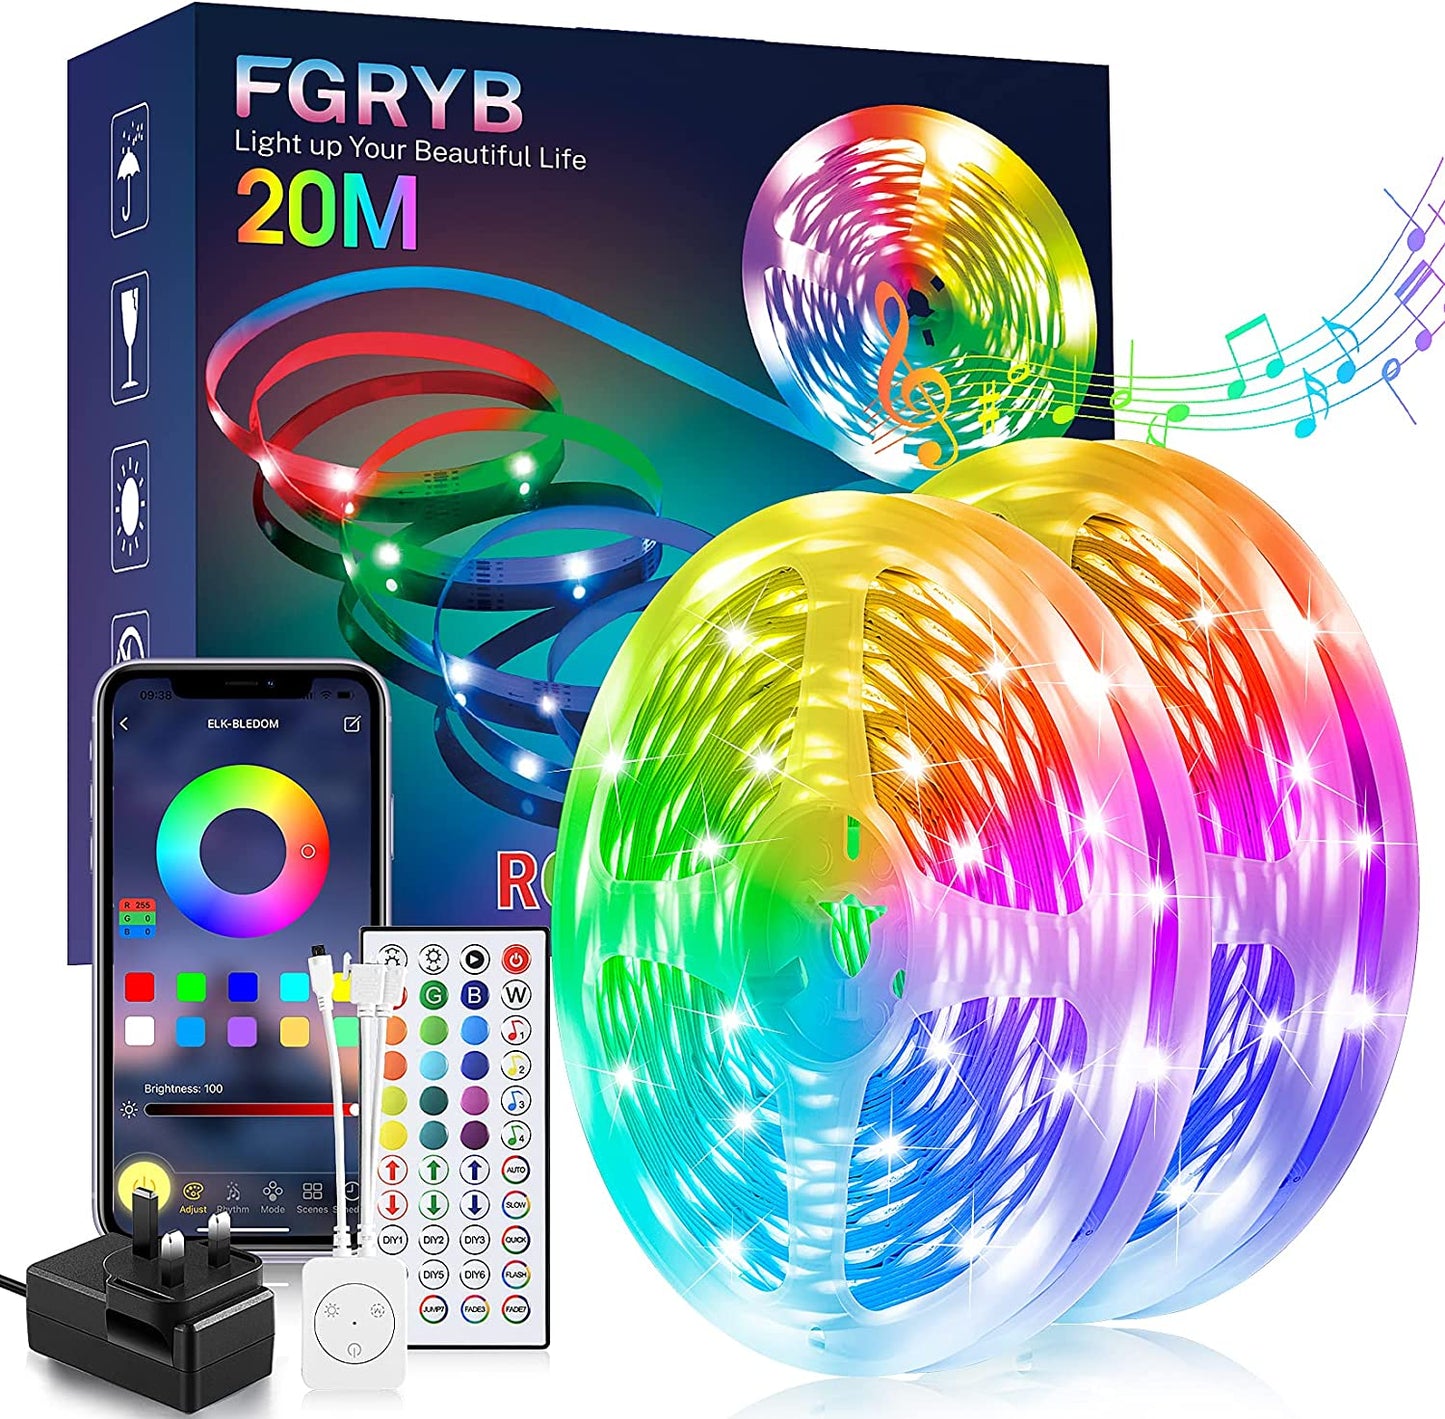 LED Strip Light 20M (2 Rolls of 10M) Ultra Long Music Sync RGB Colour Changing Led Lights for Bedroom with Bluetooth App & Remote Flexible Lighting for Home Room Kitchen Ceiling Decoration - FoxMart™️ - FGRYB